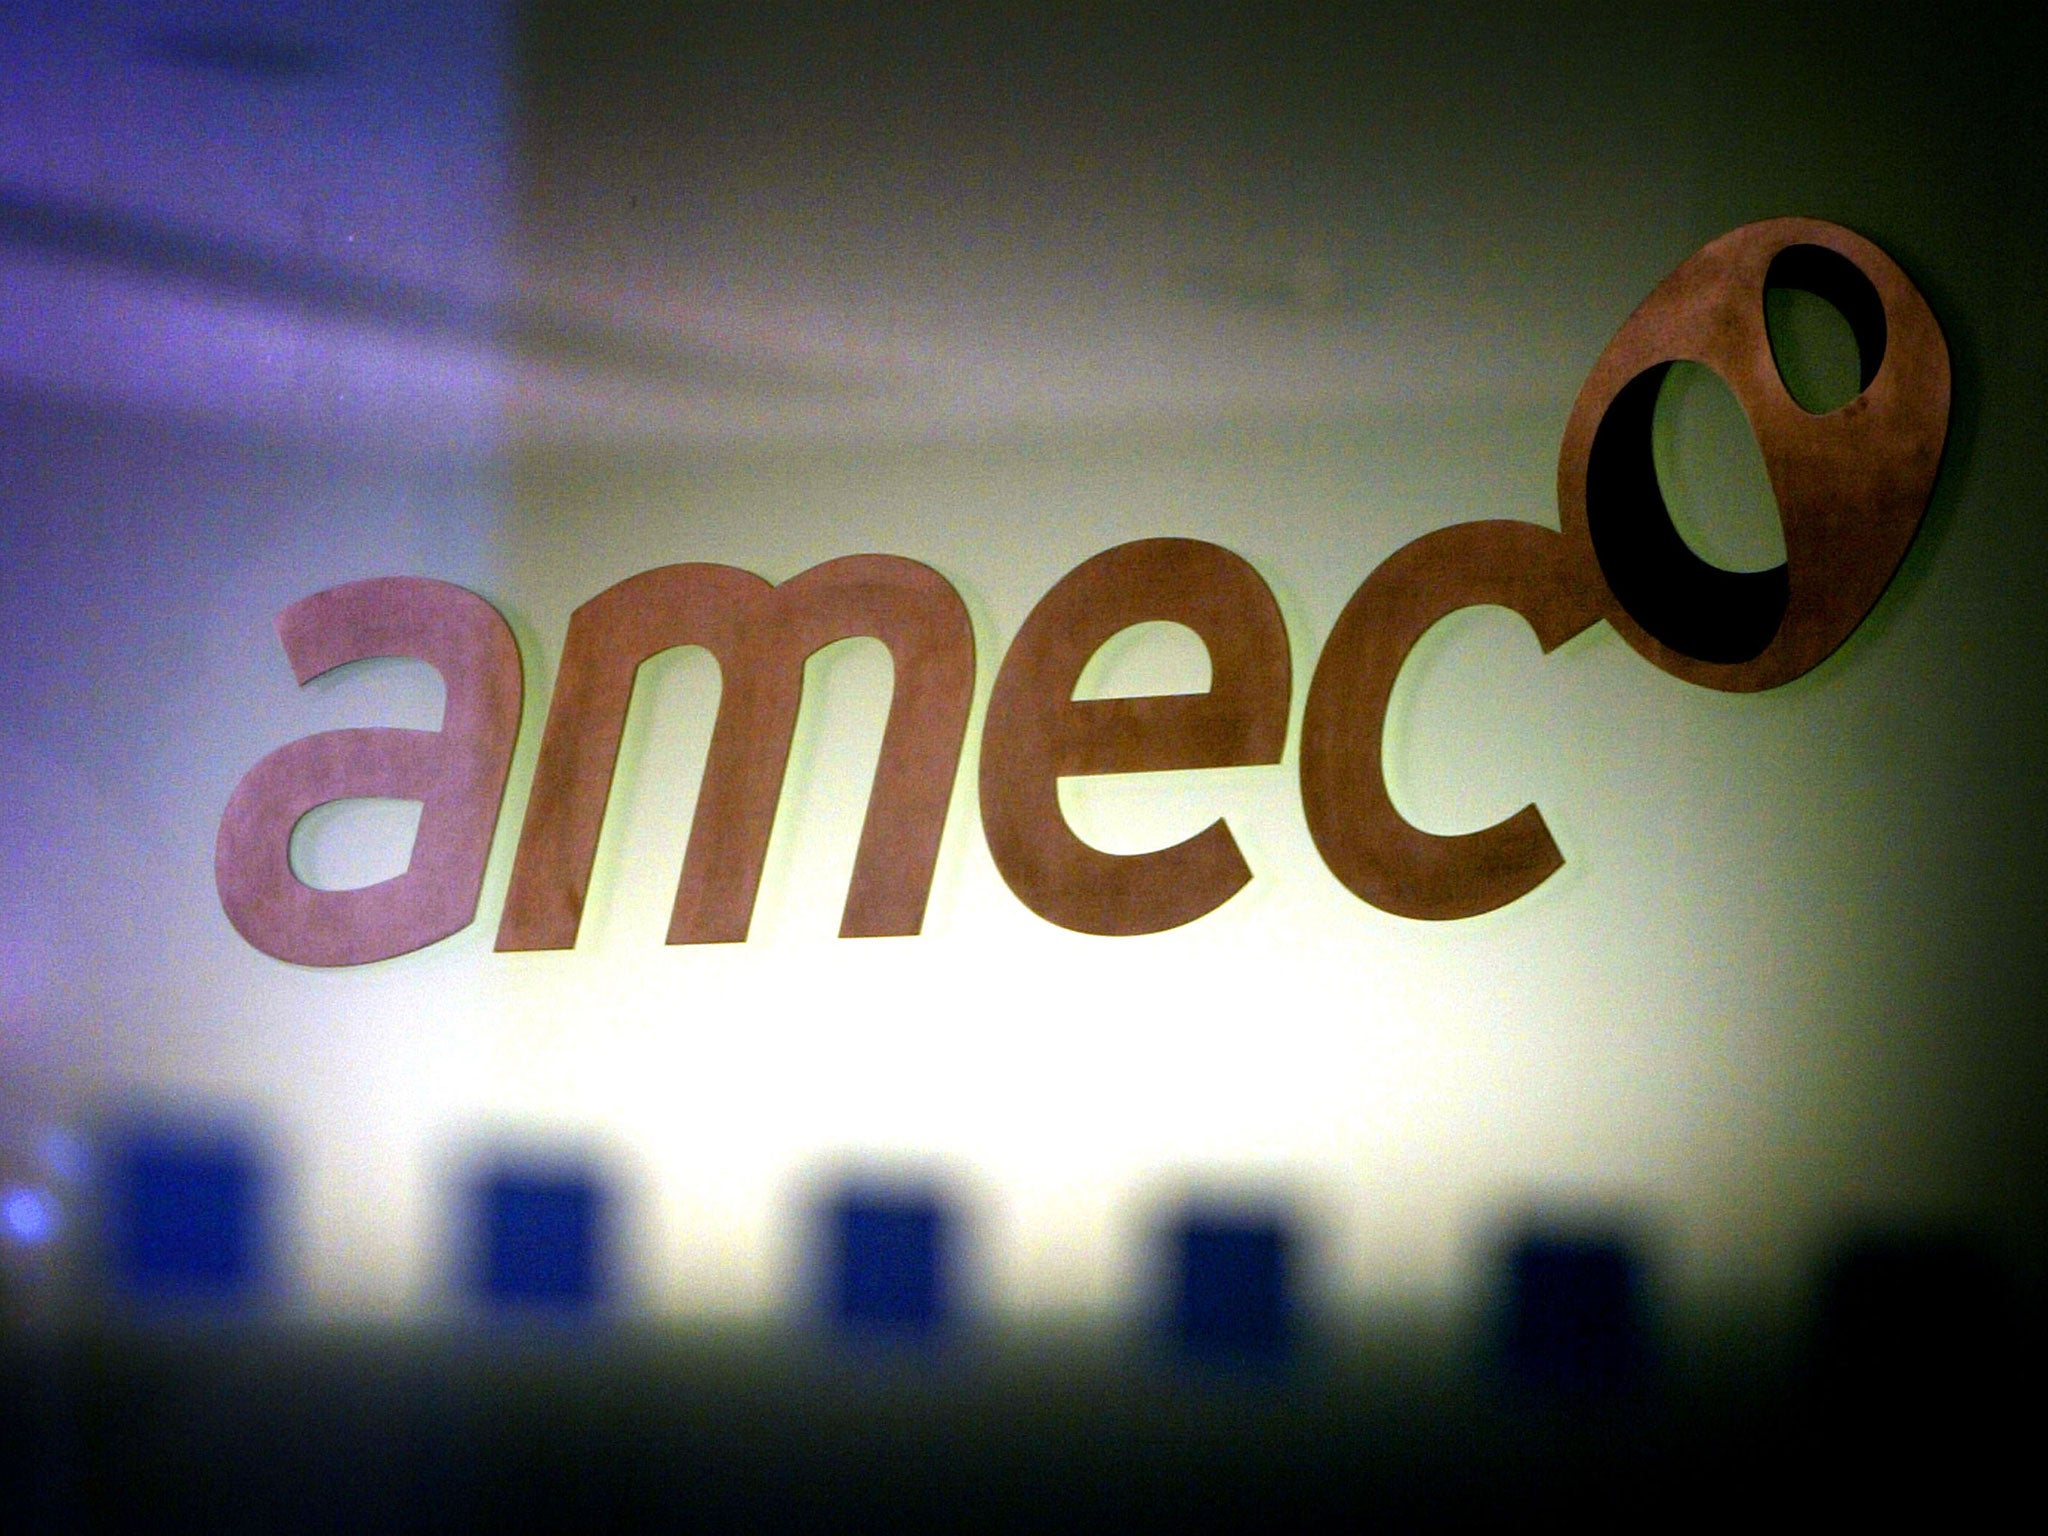 Amec offers £1.9bn to buy rival Foster Wheeler